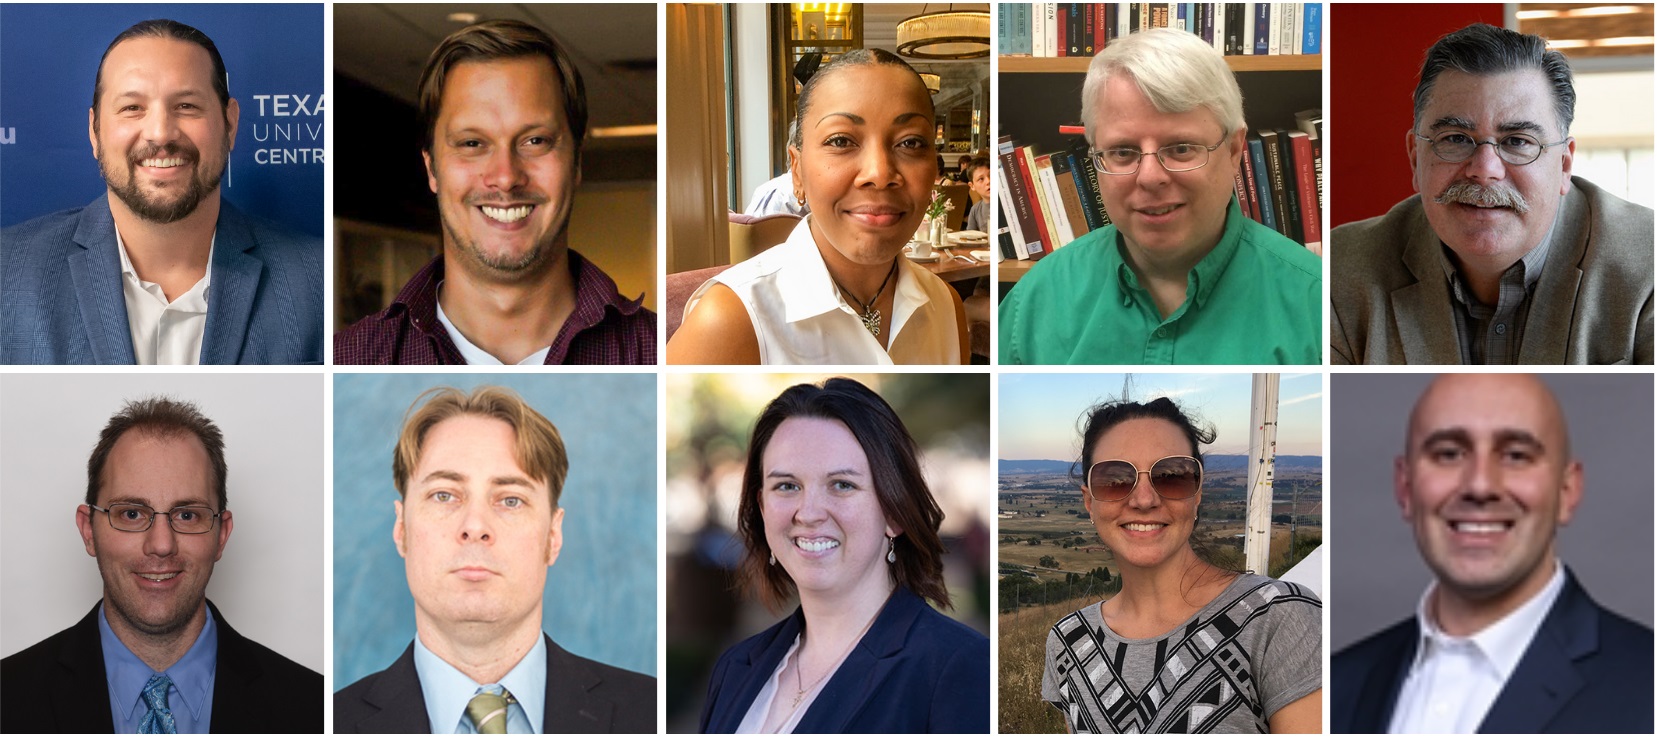 photo collage of faculty and staff participating in election night coverage. Top row (Left to Right): Dr. Jeremy Berry, Dr. Bruce Bowles, Dr. Sanfrená Britt, Dr. Jeffrey Dixon, Dr. Jerry Jones. Bottom row (Left to Right): Dr. John Koehler, Dr. Sam Fiala, Dr.Stephanie Peebles Tavera, Dr. Roslyn Schoen, Paul York. Not Pictured: Dr. Amy Mersiovsky and Dr. Rob Tennant